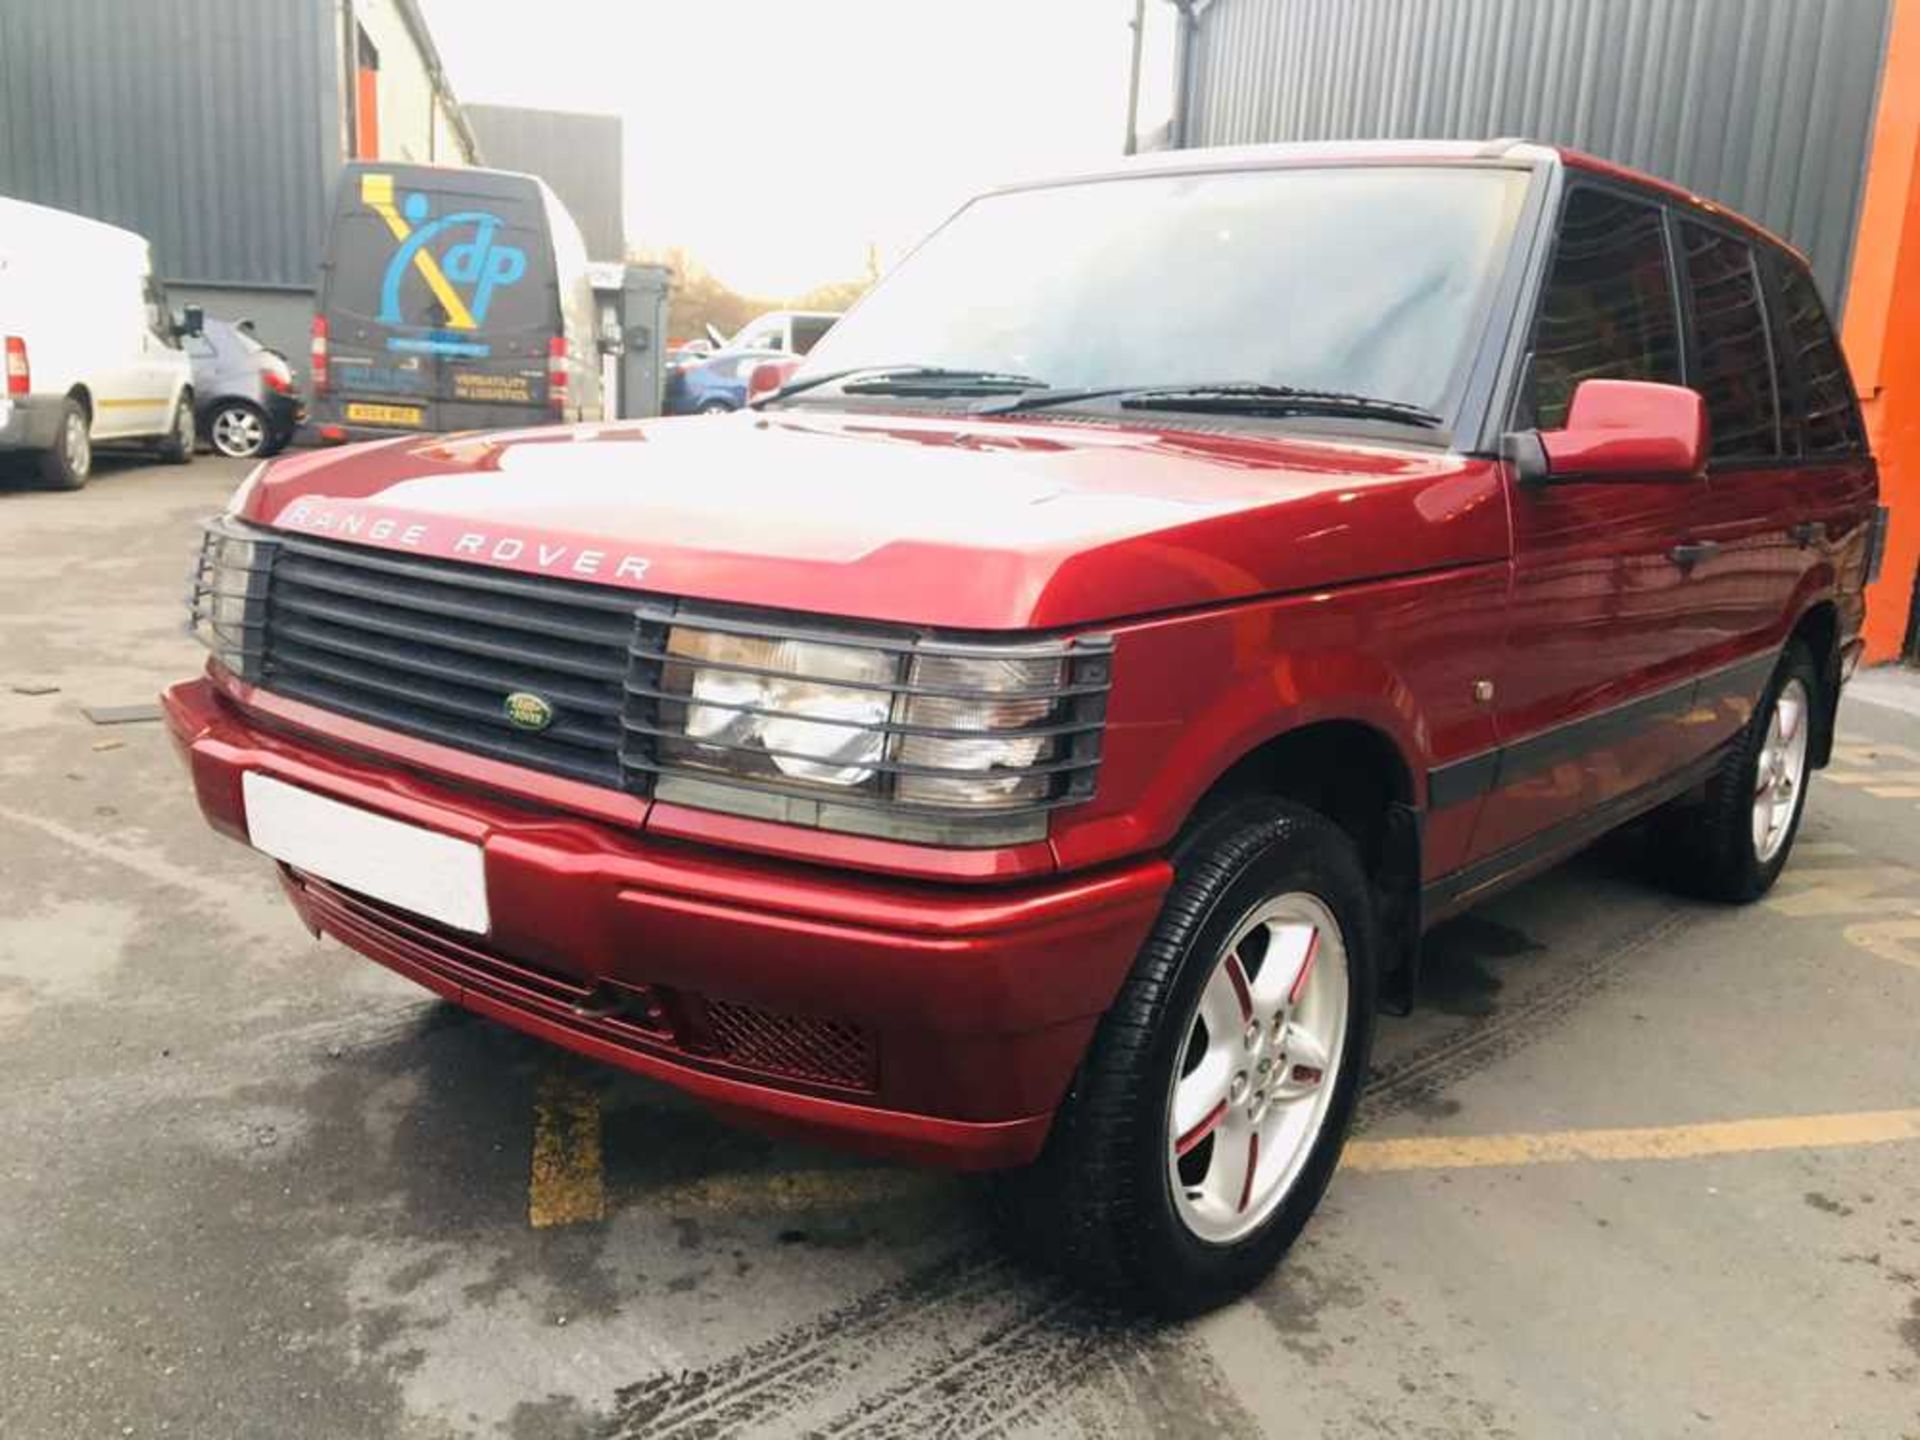 2001 Range Rover 2.5 TD Bordeaux One of just 200 UK-supplied limited edition 'Bordeaux' examples - Image 3 of 20